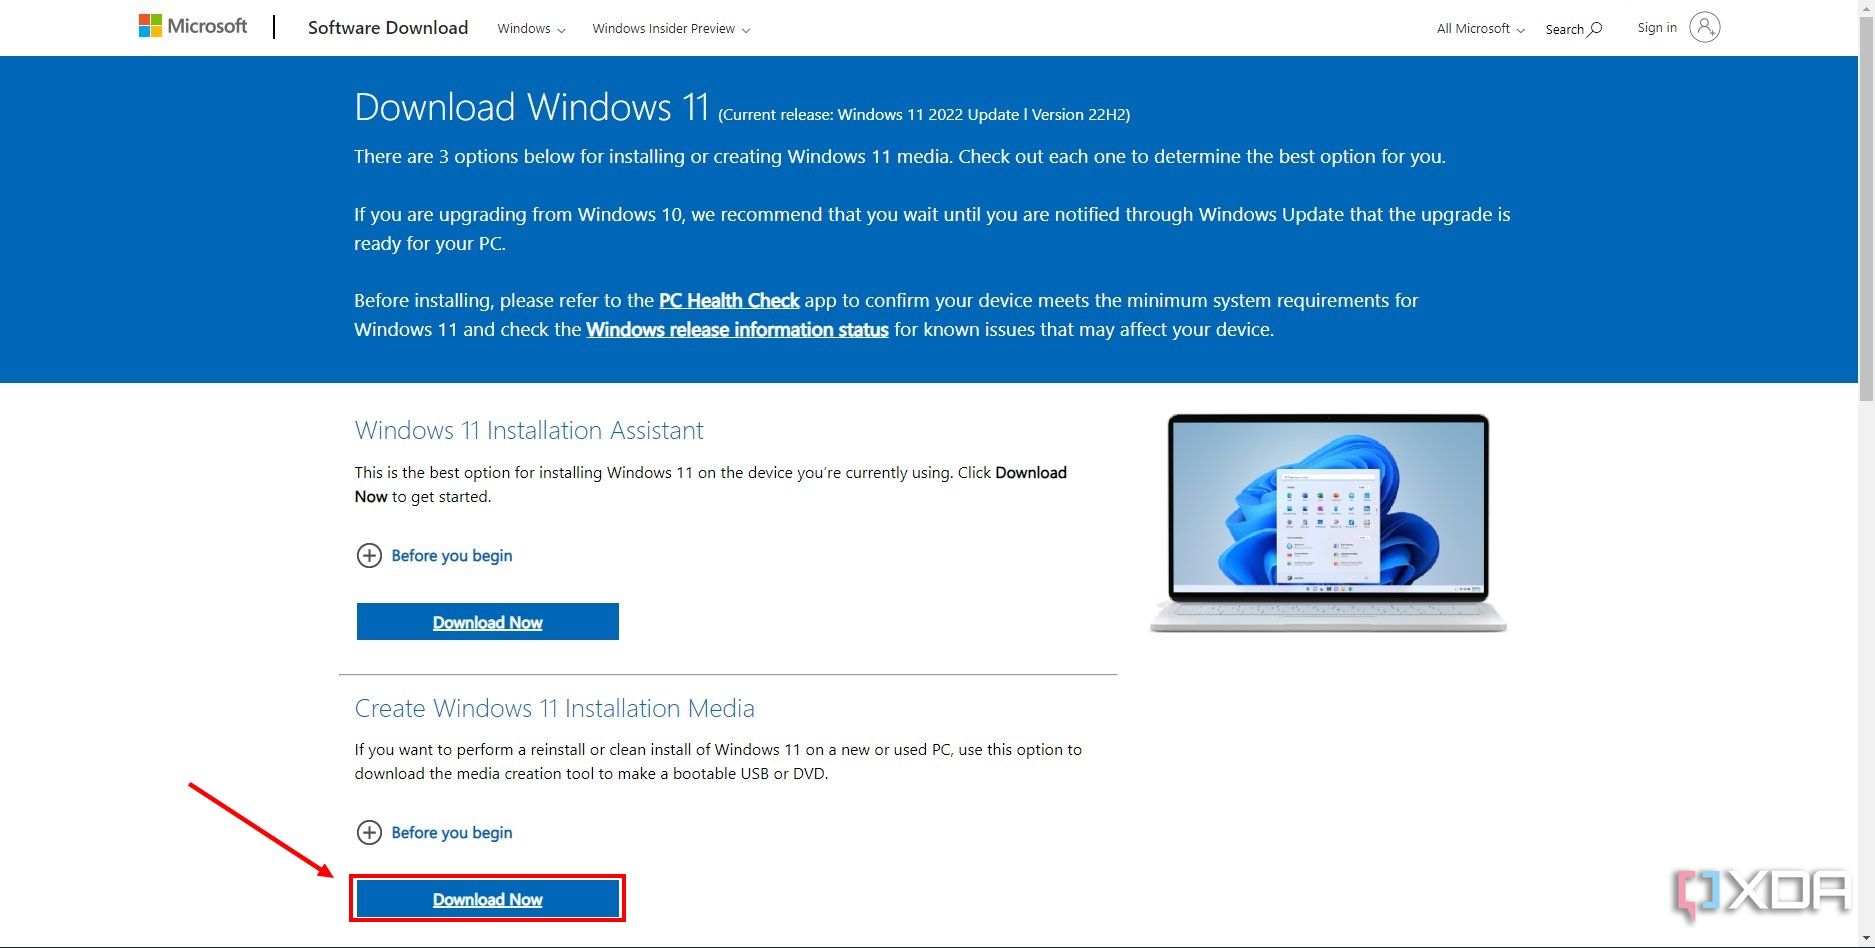 Screenshot of the Windows 11 download page with the Download Now button highlighted under Create Windows 11 Installation Media